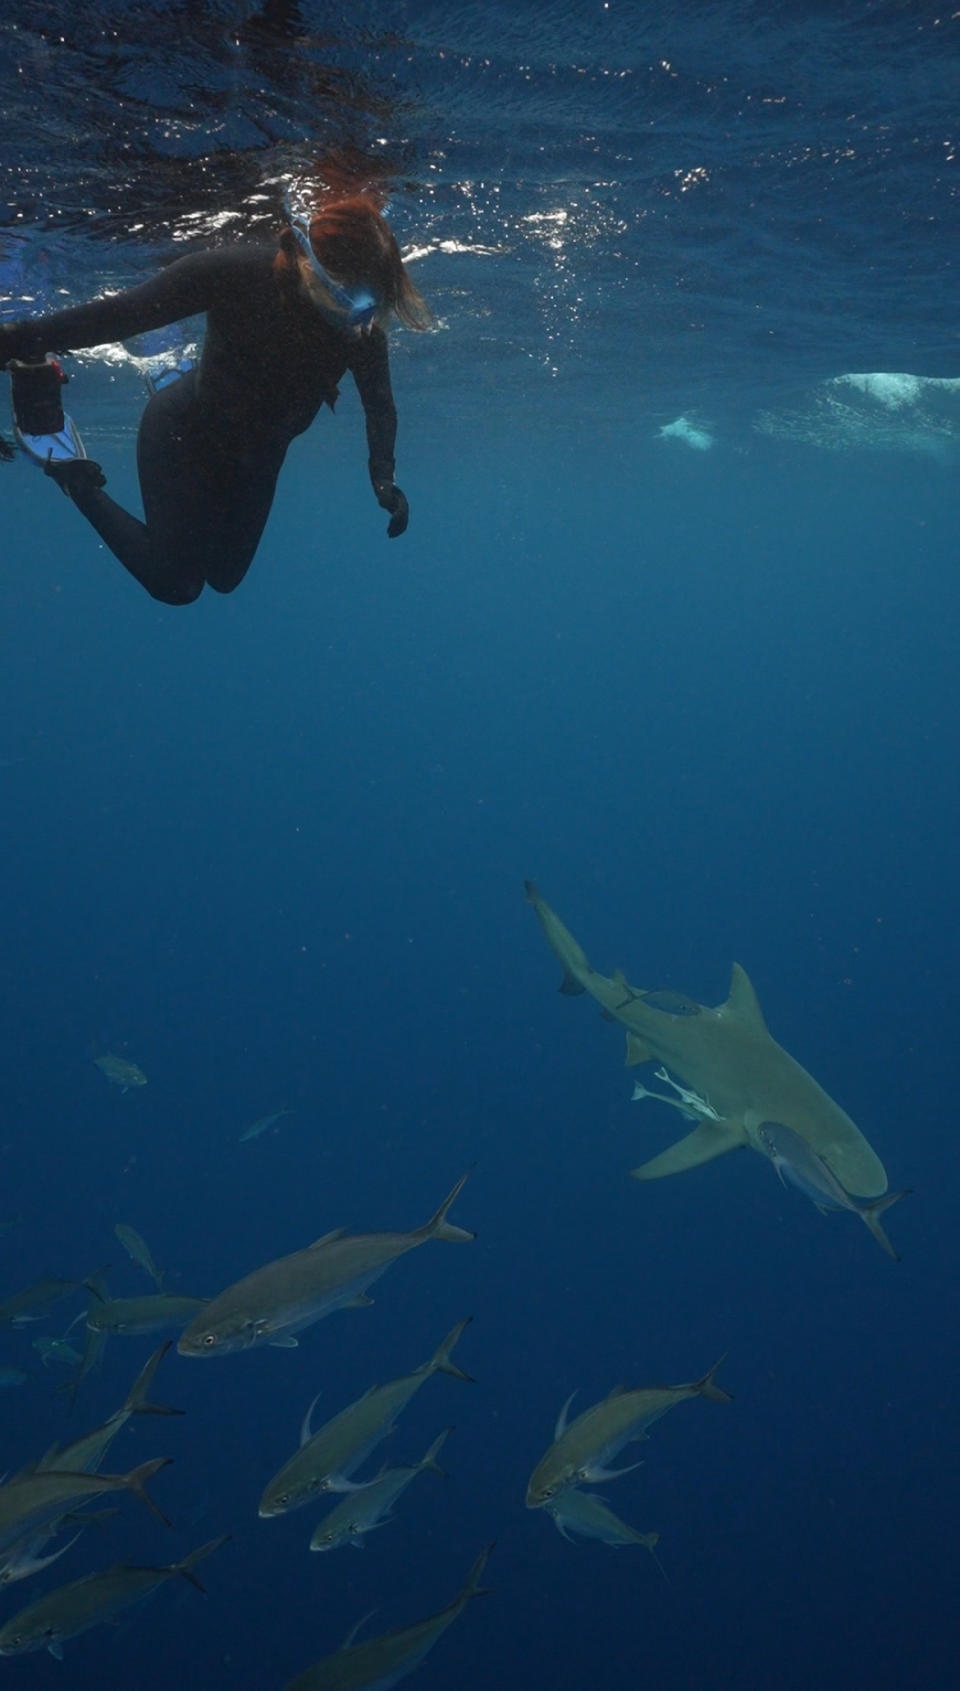 A person swims with a shark and several smaller fish